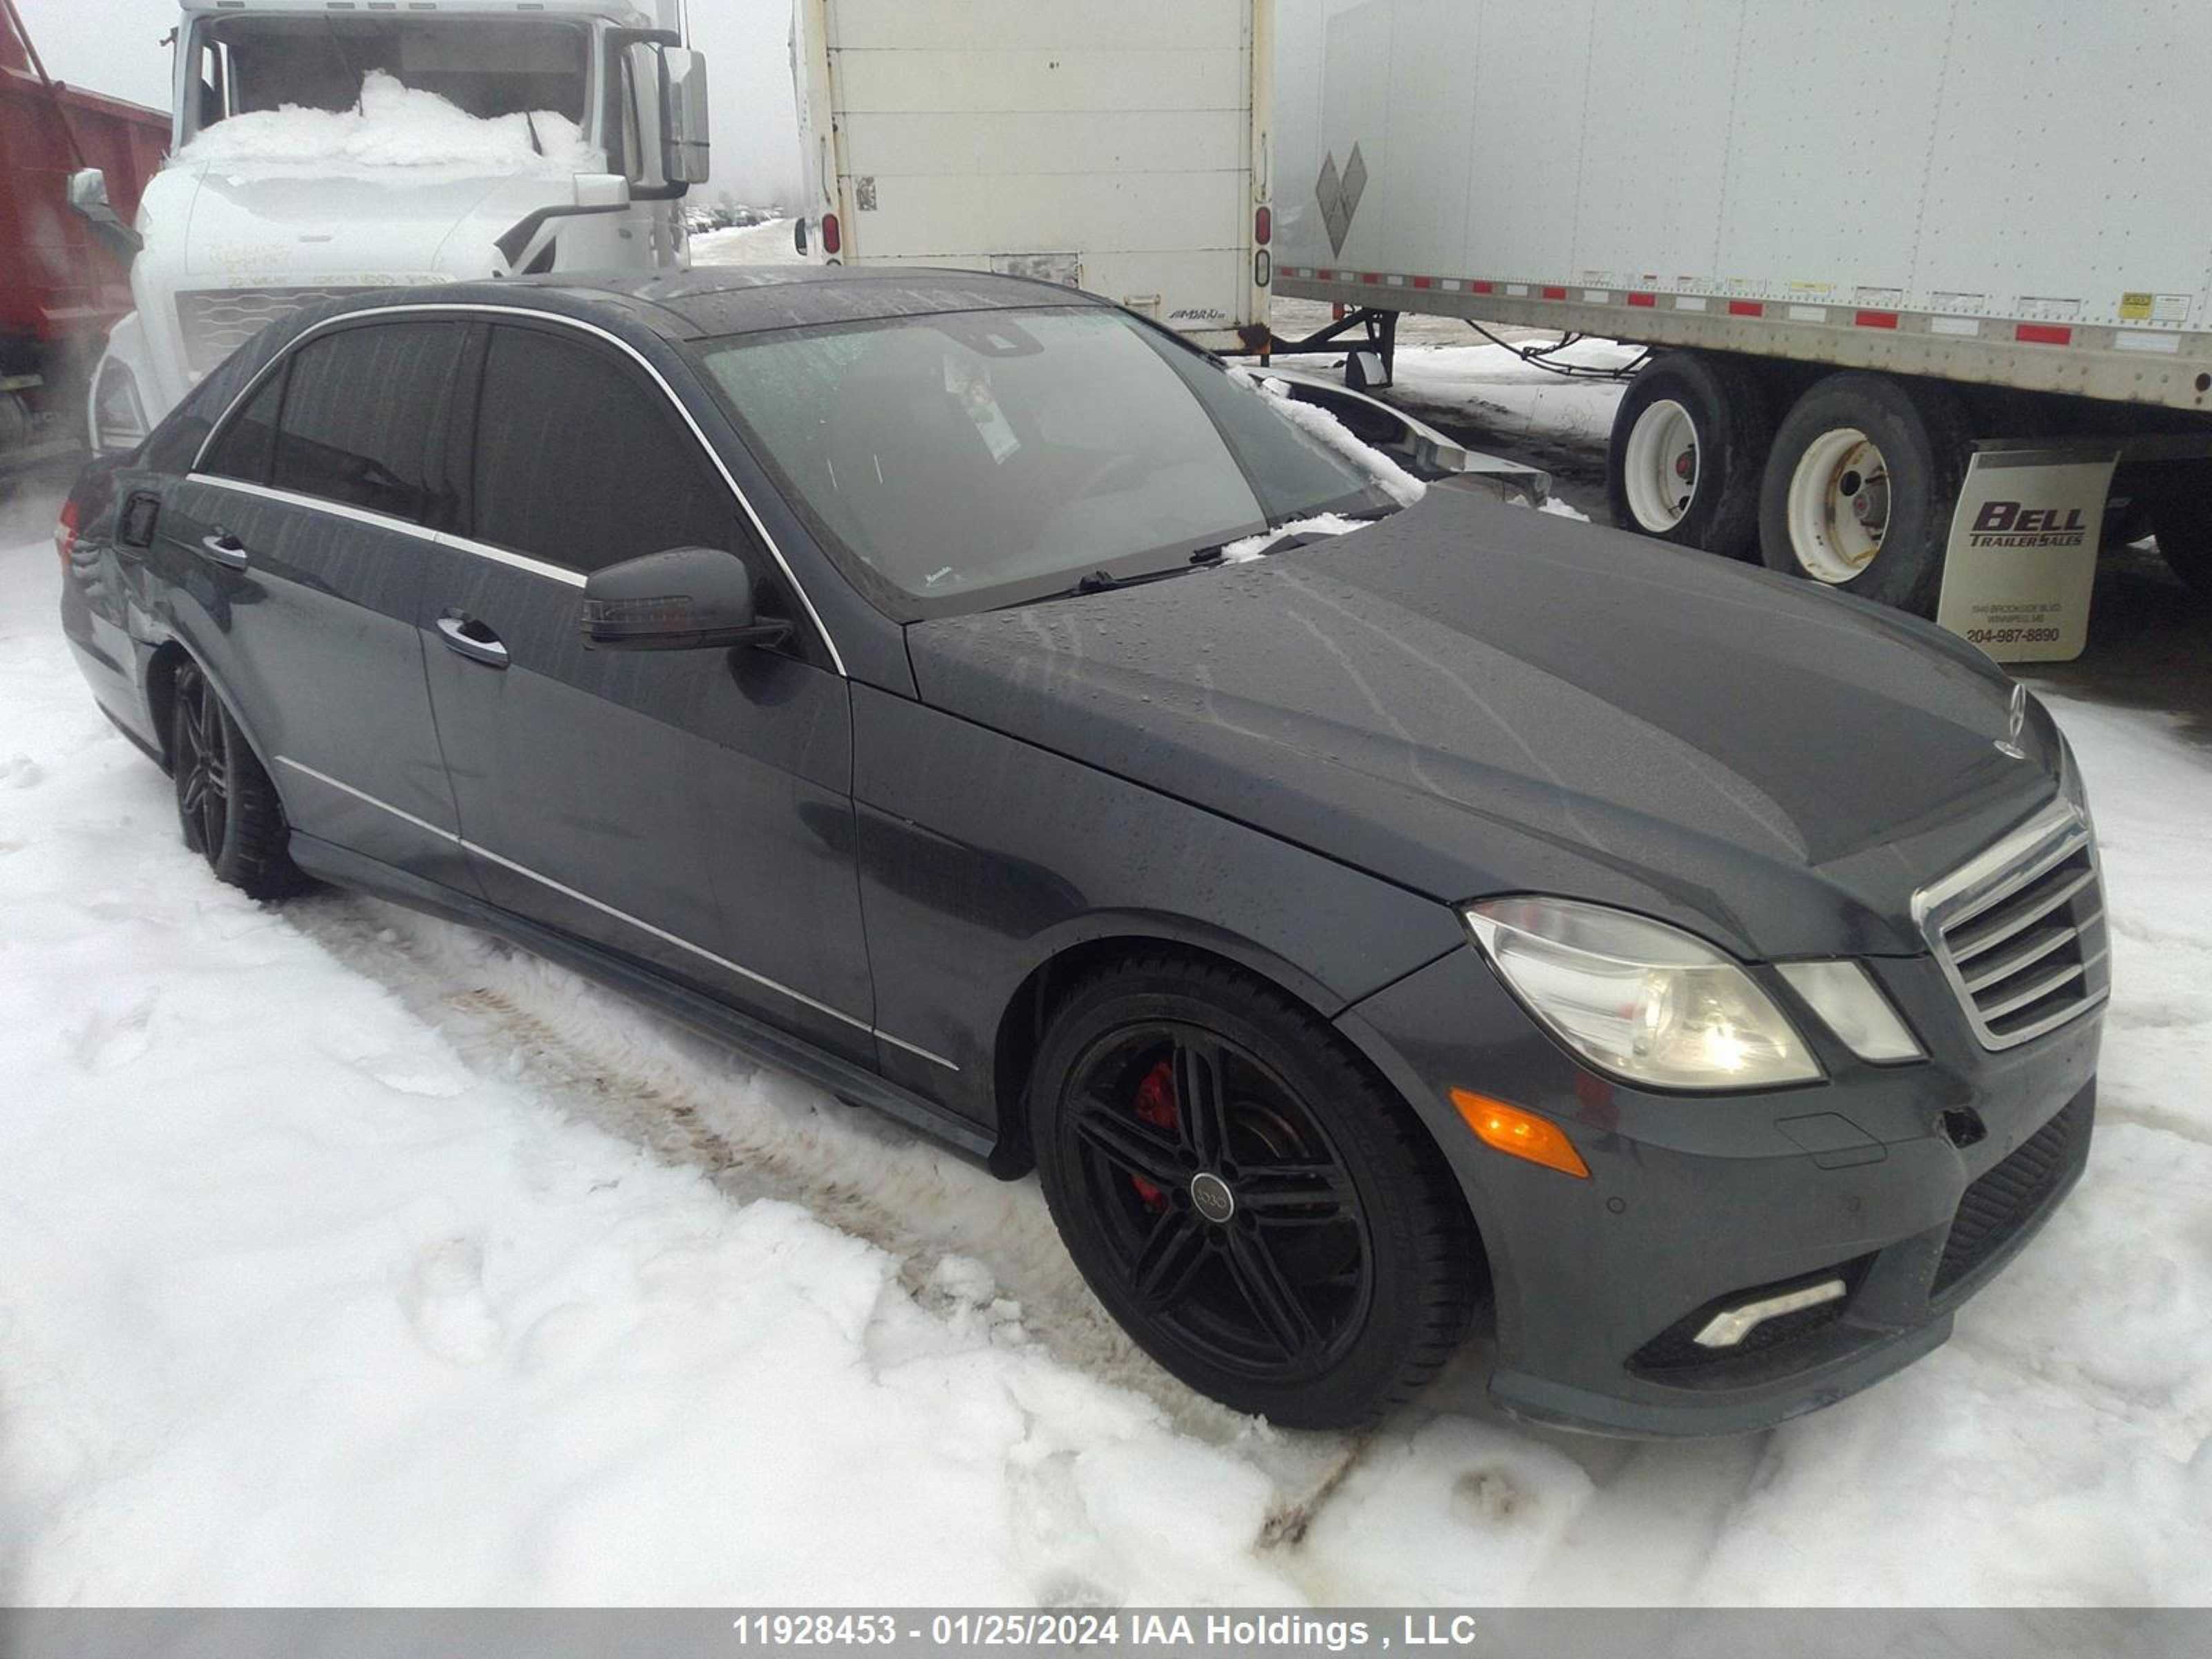 vin: WDDHF9AB8AA256815 WDDHF9AB8AA256815 2010 mercedes-benz e-klasse 5500 for Sale in l4a7x4, 16505 Hwy 48 , Stouffville, Ontario, USA